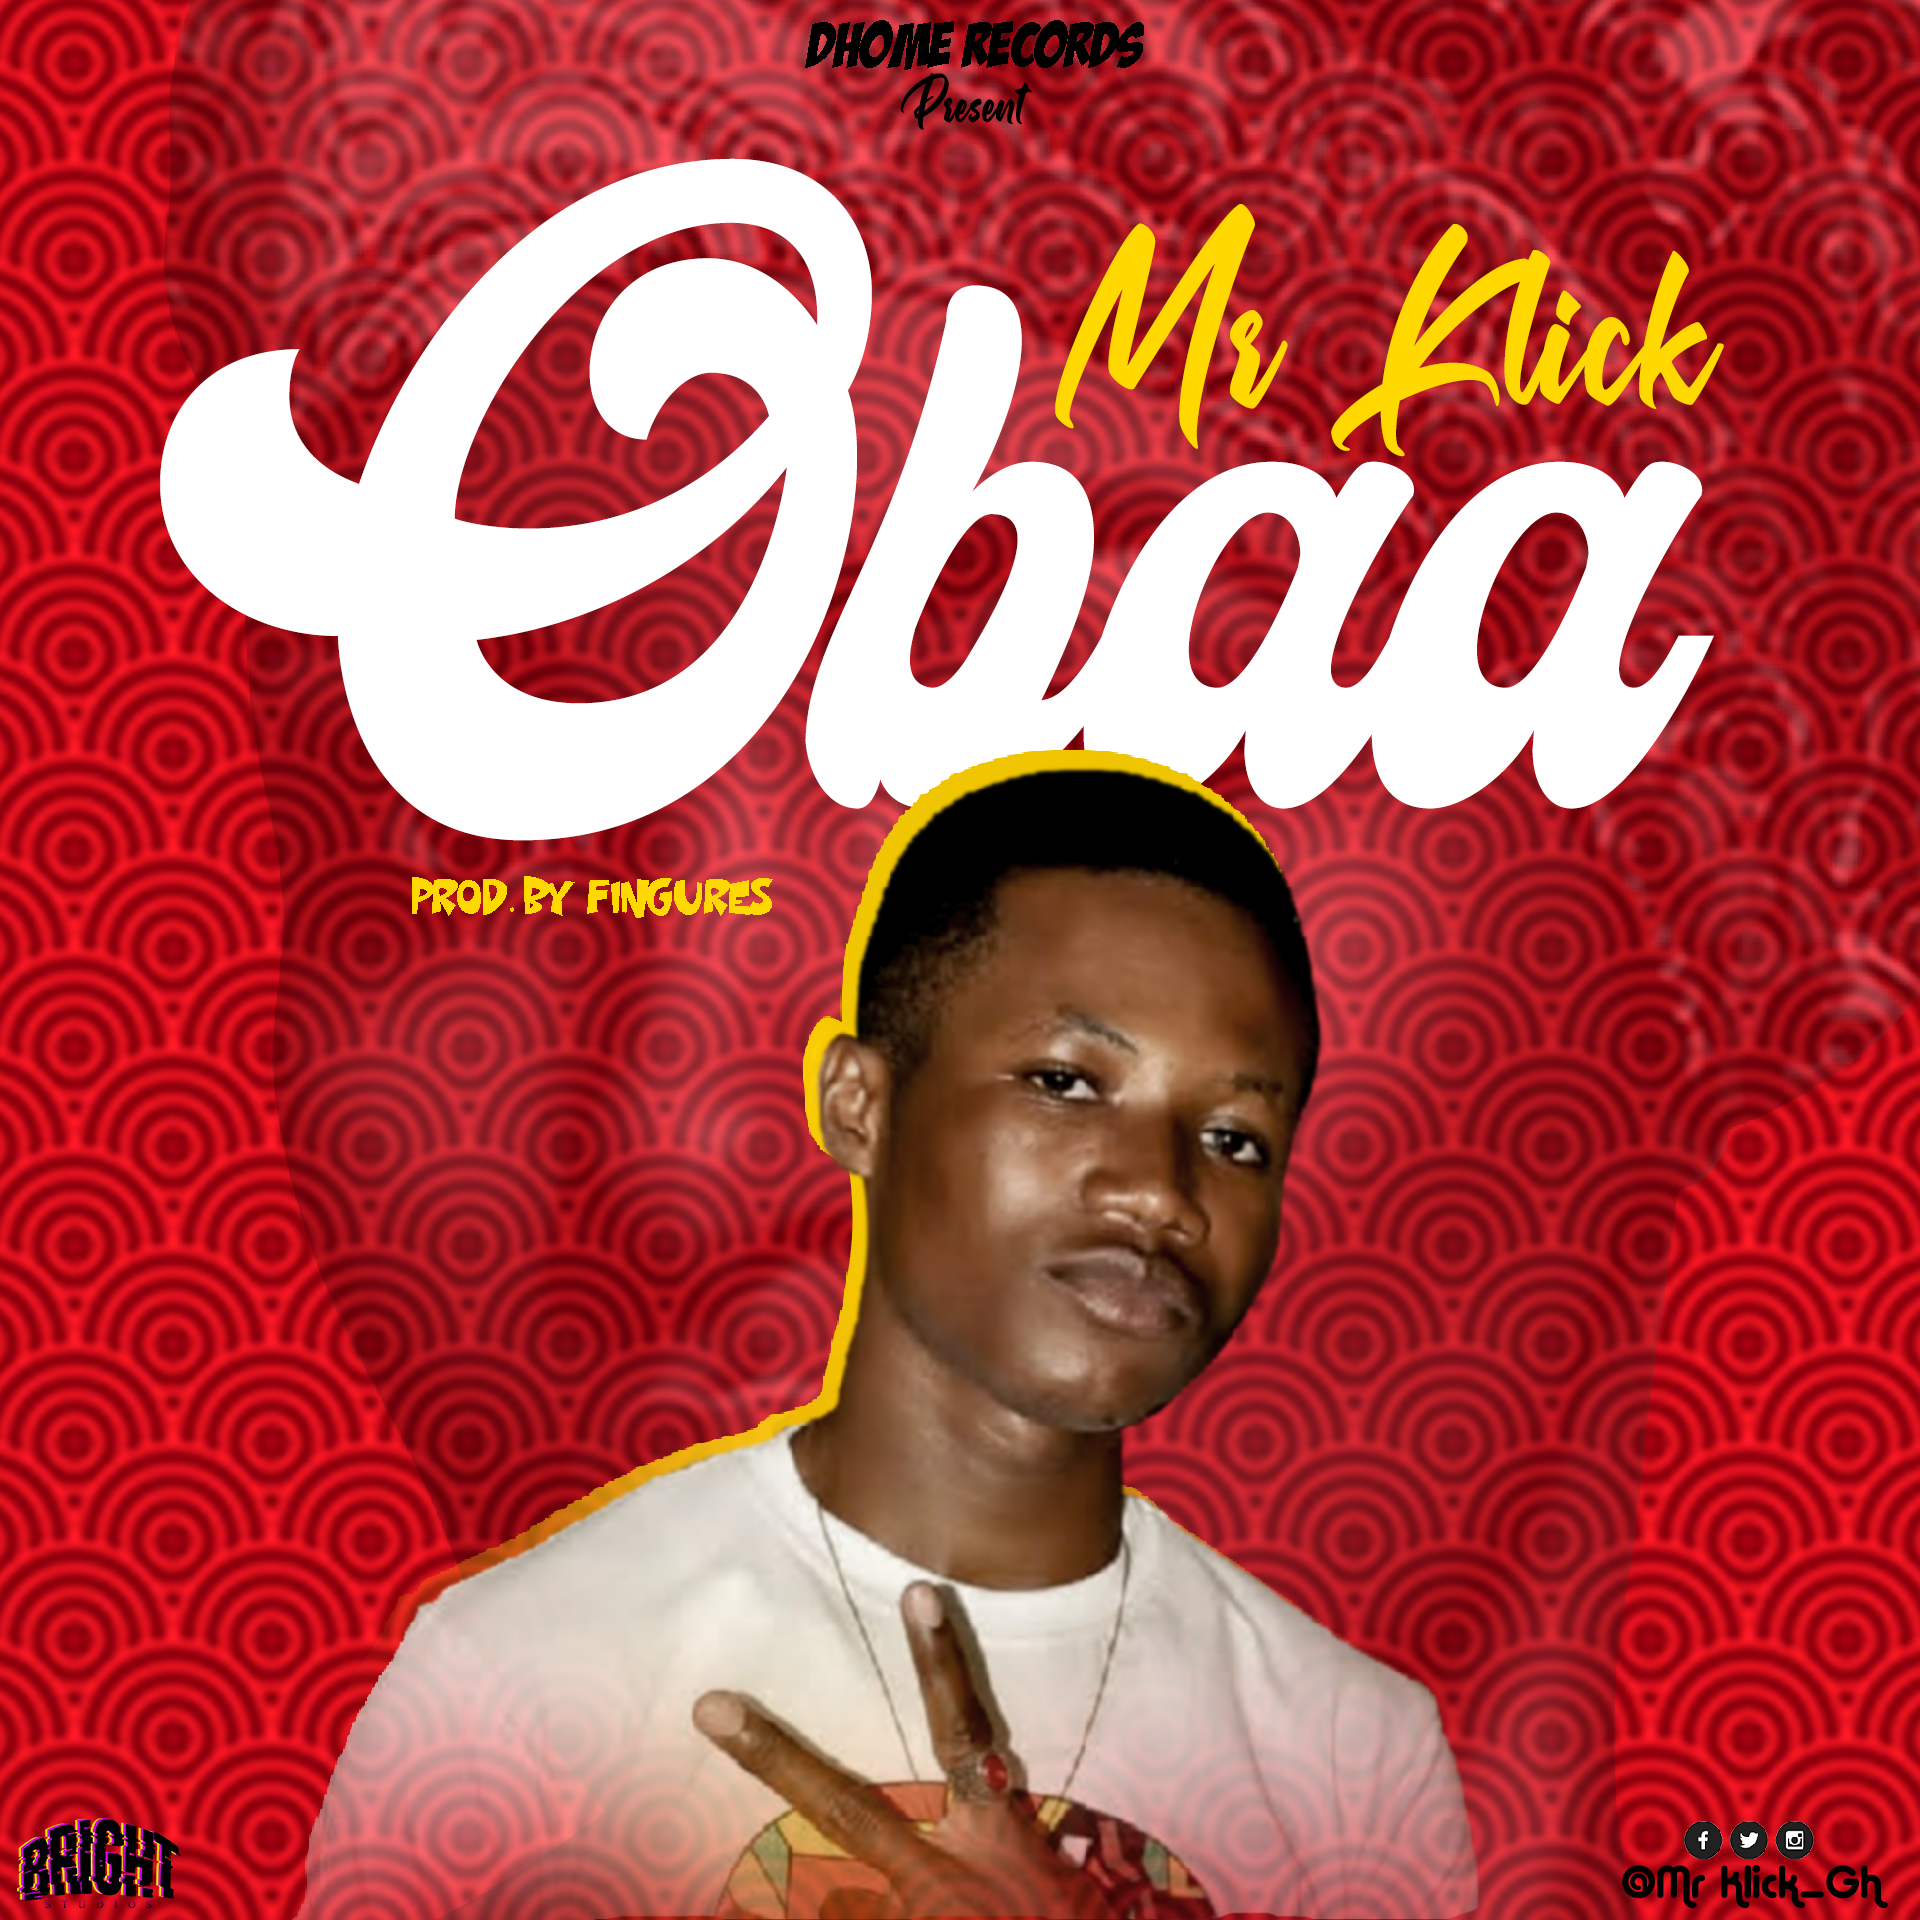 Mr Klick - Obaa (Mixed by Figures)